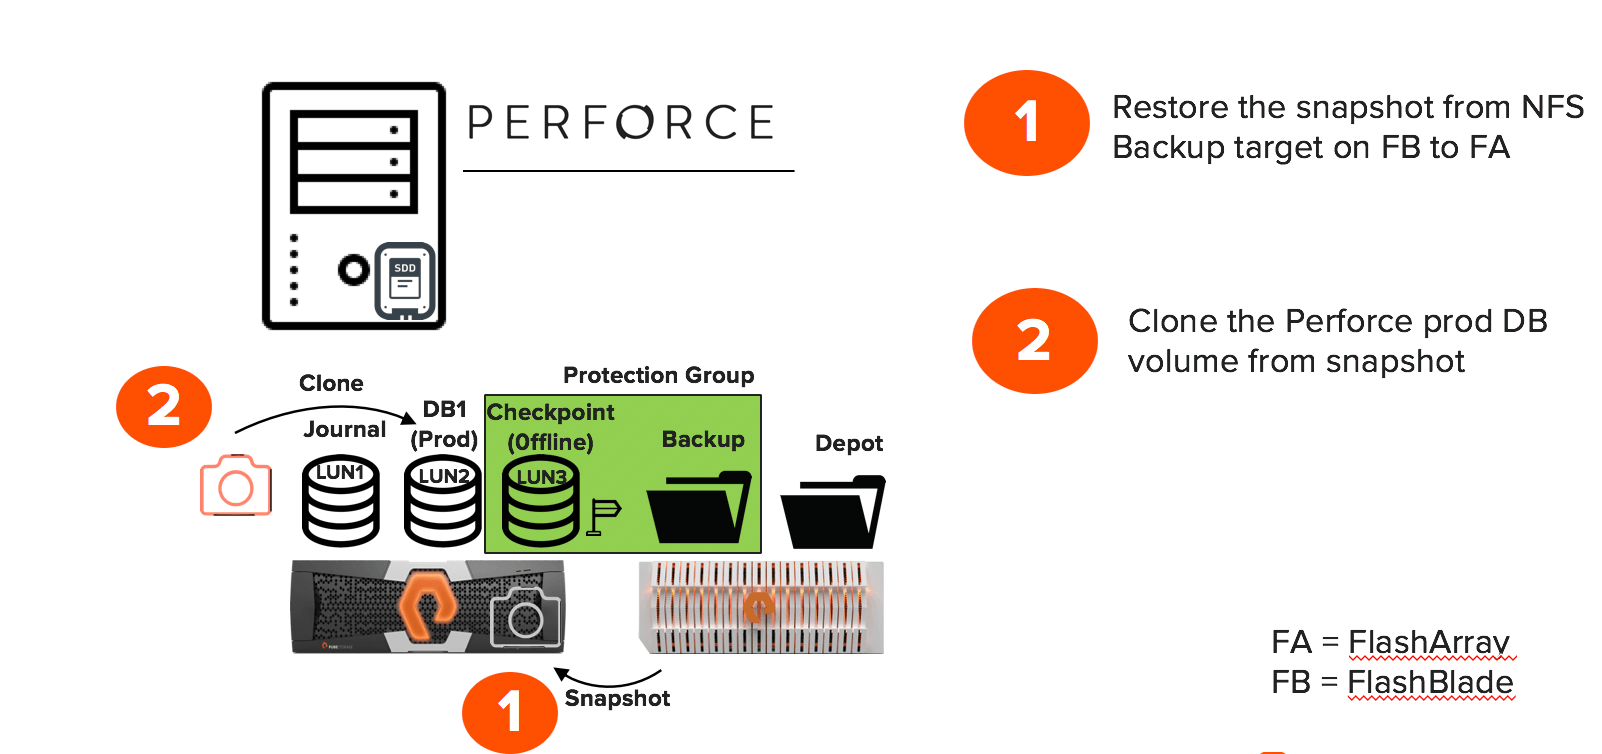 Perforce restore the snapshot from backup target to FlasbhBlade and FlashArray. Clone the Perforce prod DV volume from snapshot (data recovery)